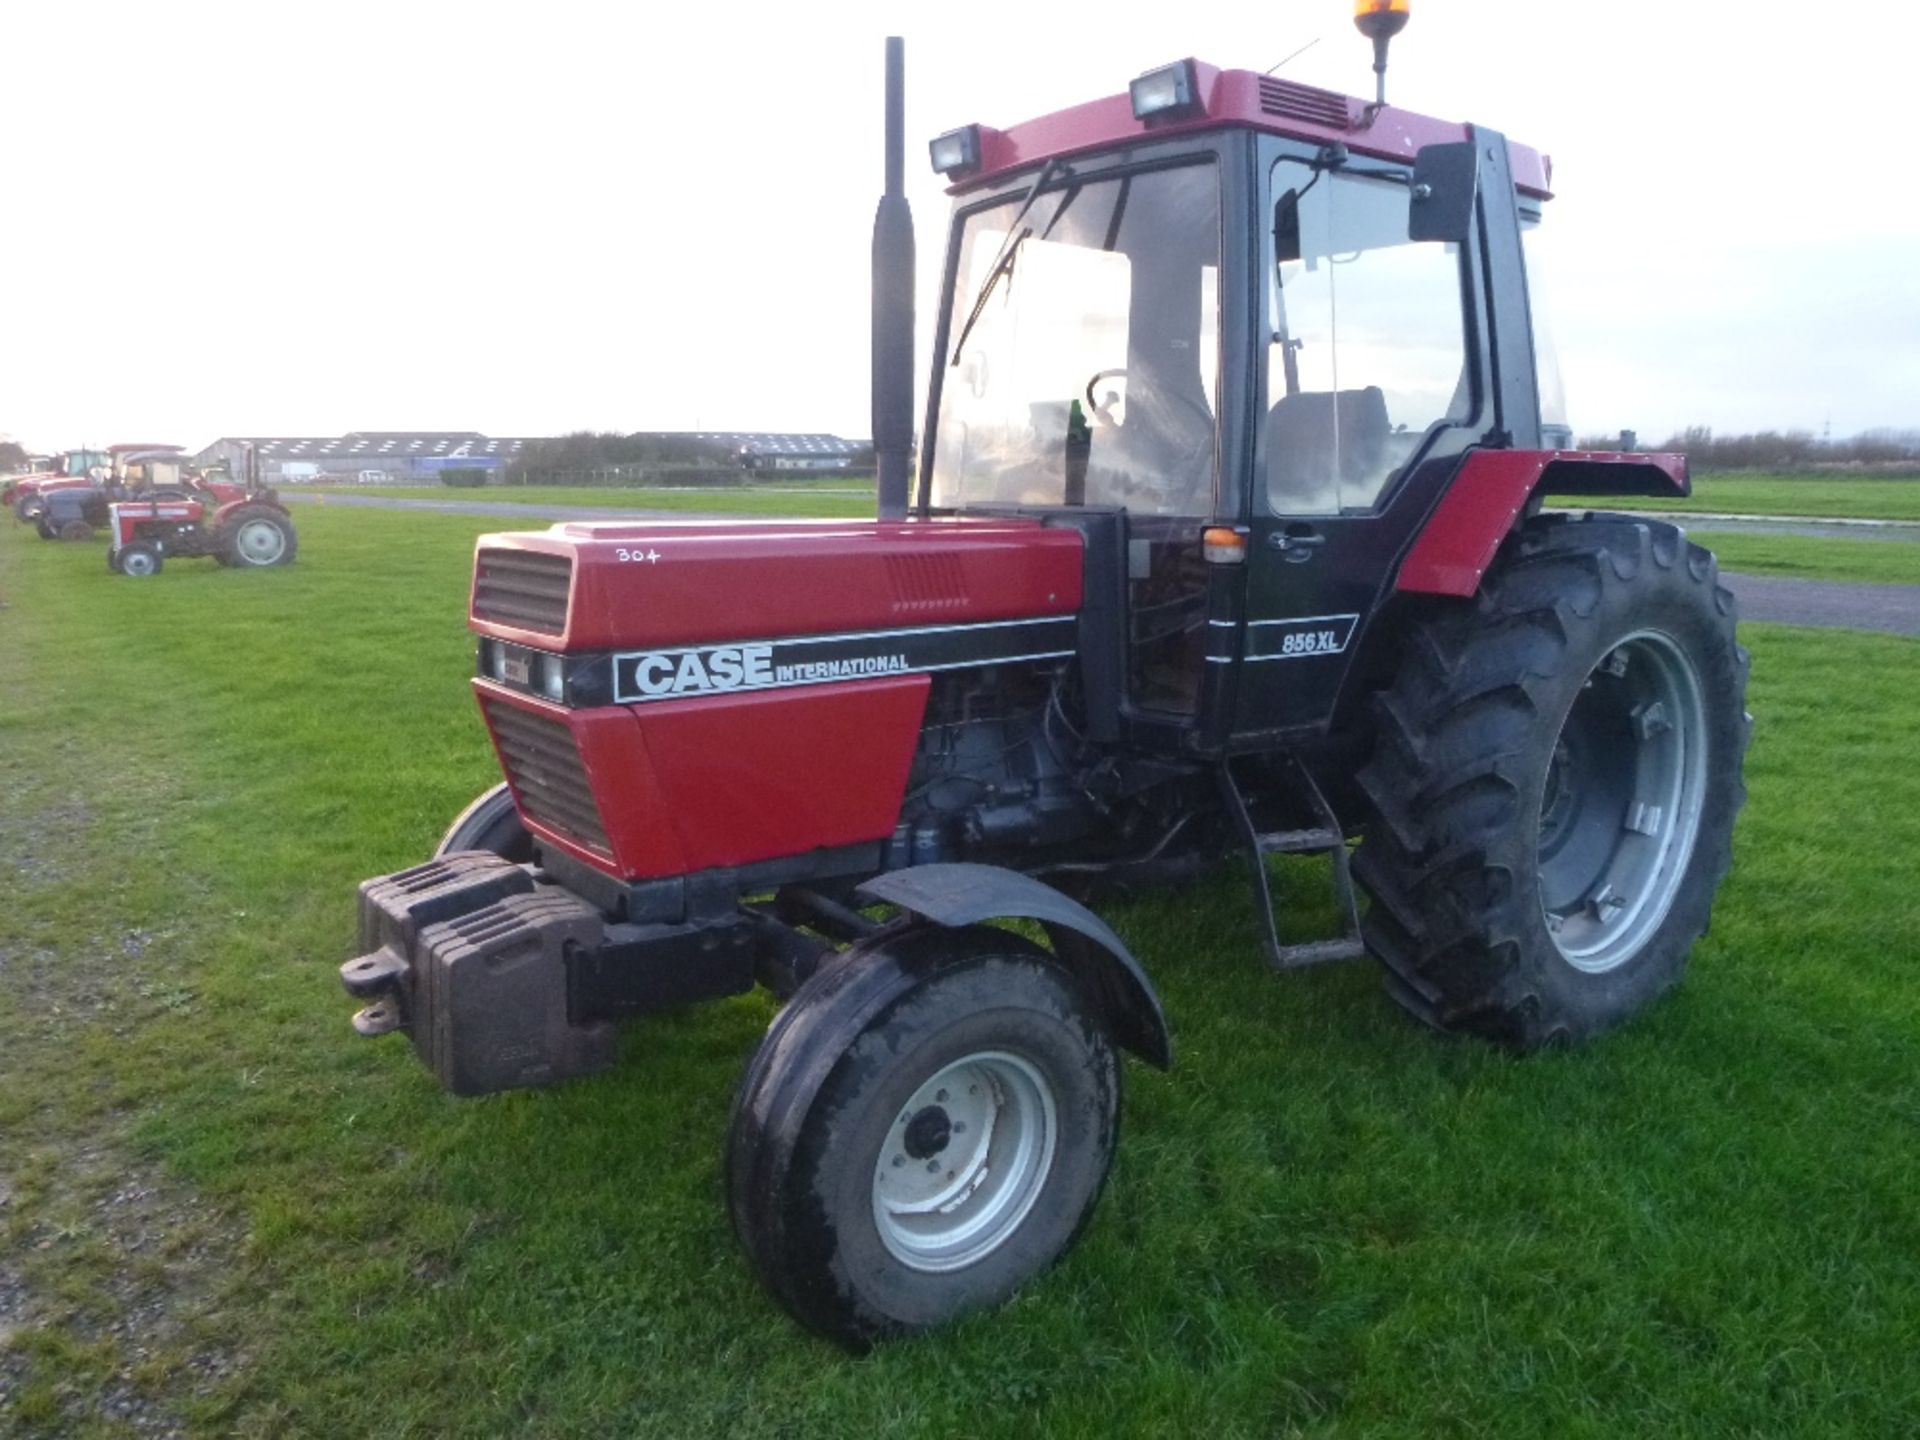 Case 856XL 2wd Tractor. 3050 hrs - date of reg 31/12/89
V5 Applied for.